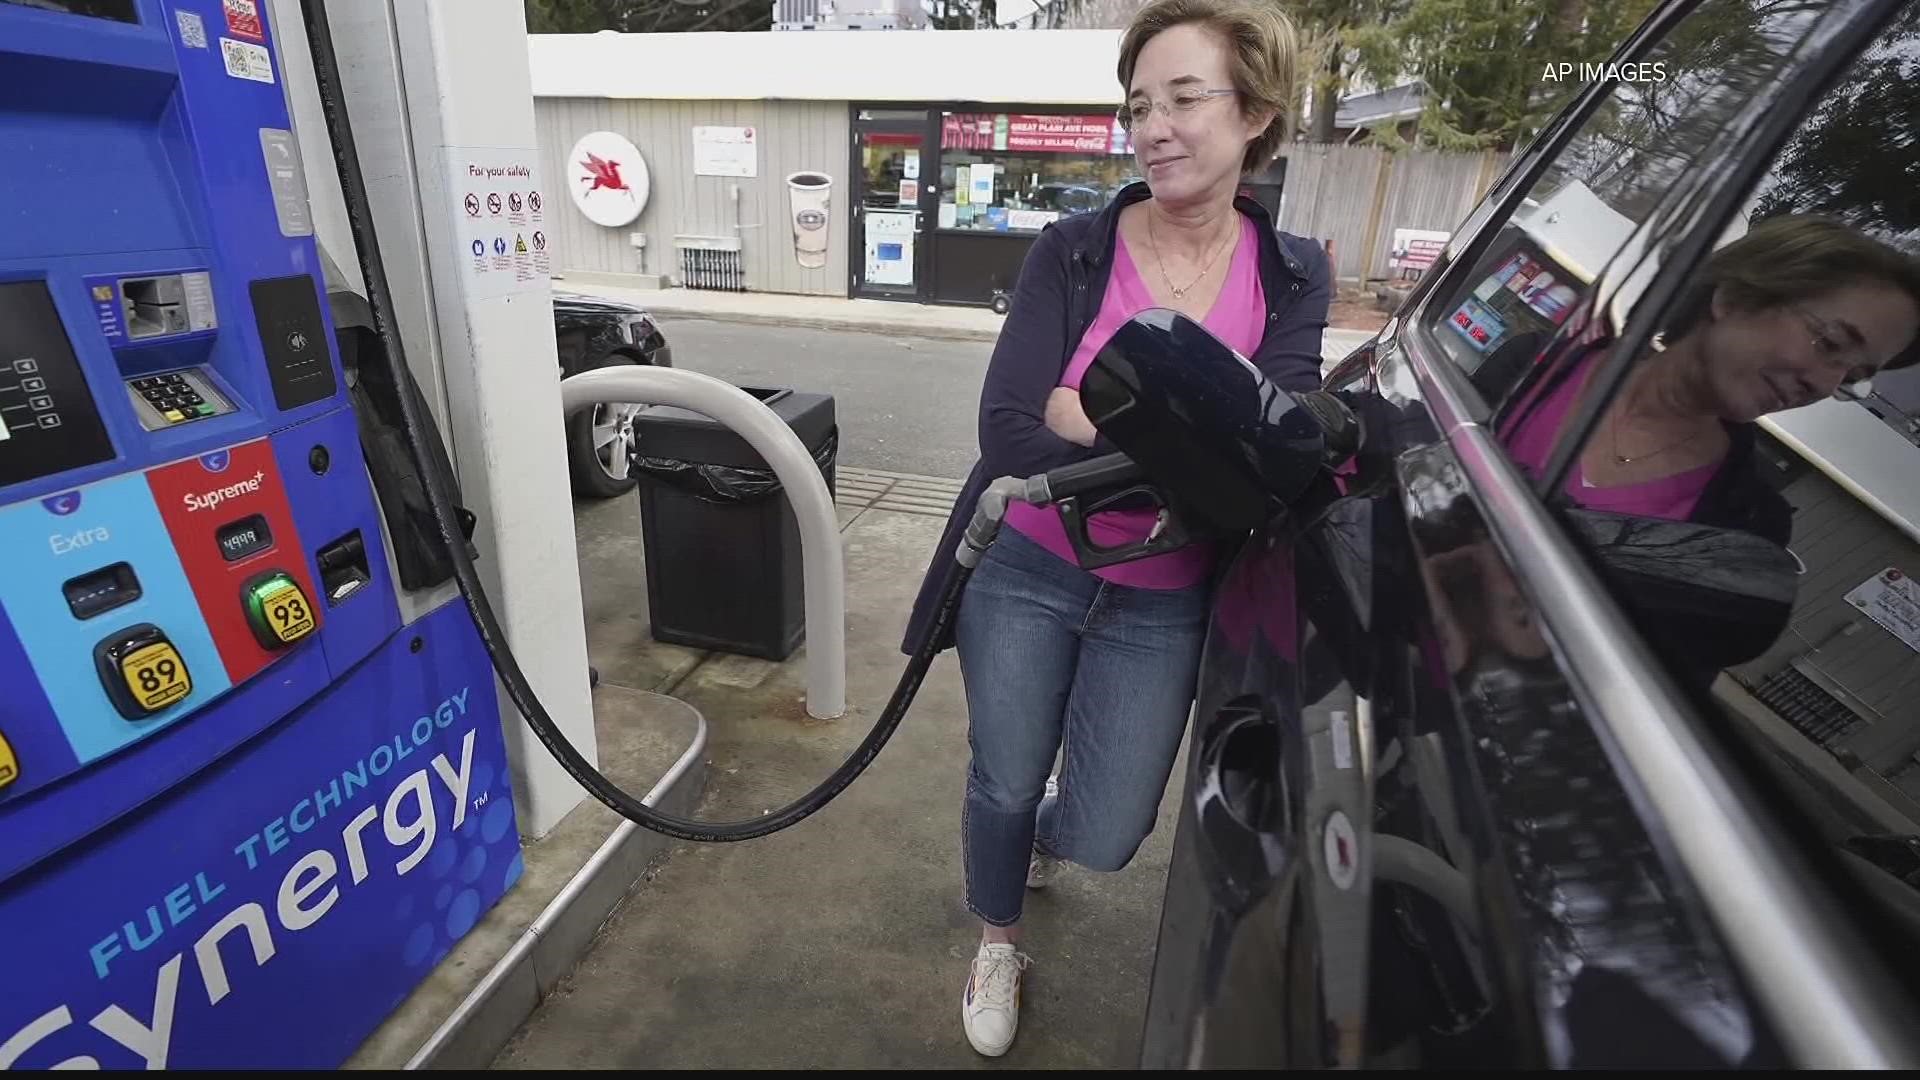 Many gas stations charge you less if you put your credit card away and reach for the cash.